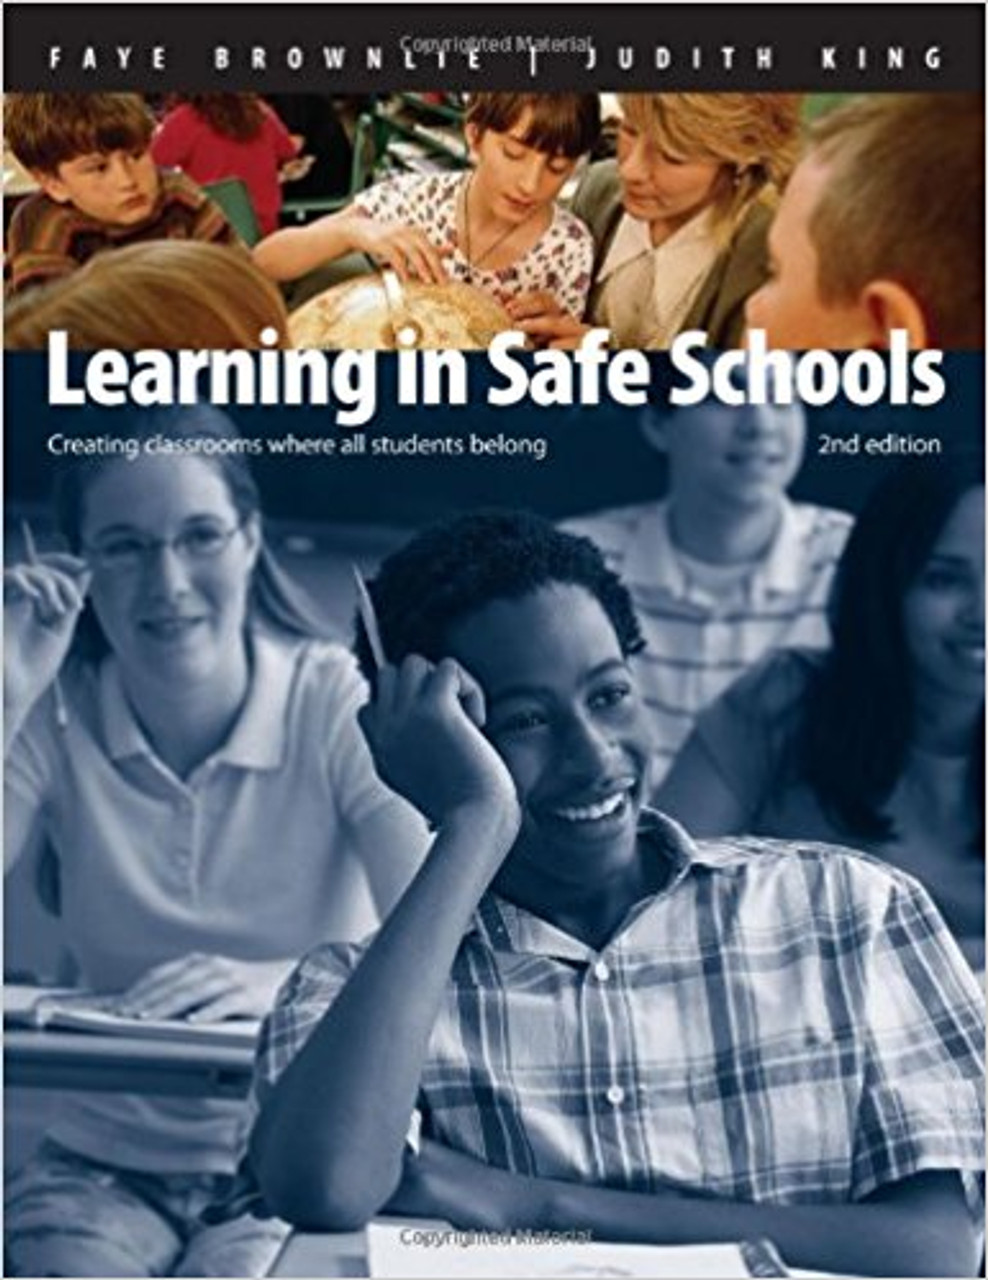 Learning in Safe Schools: Creating Classrooms Where All Students Belong by Faye Brownlie